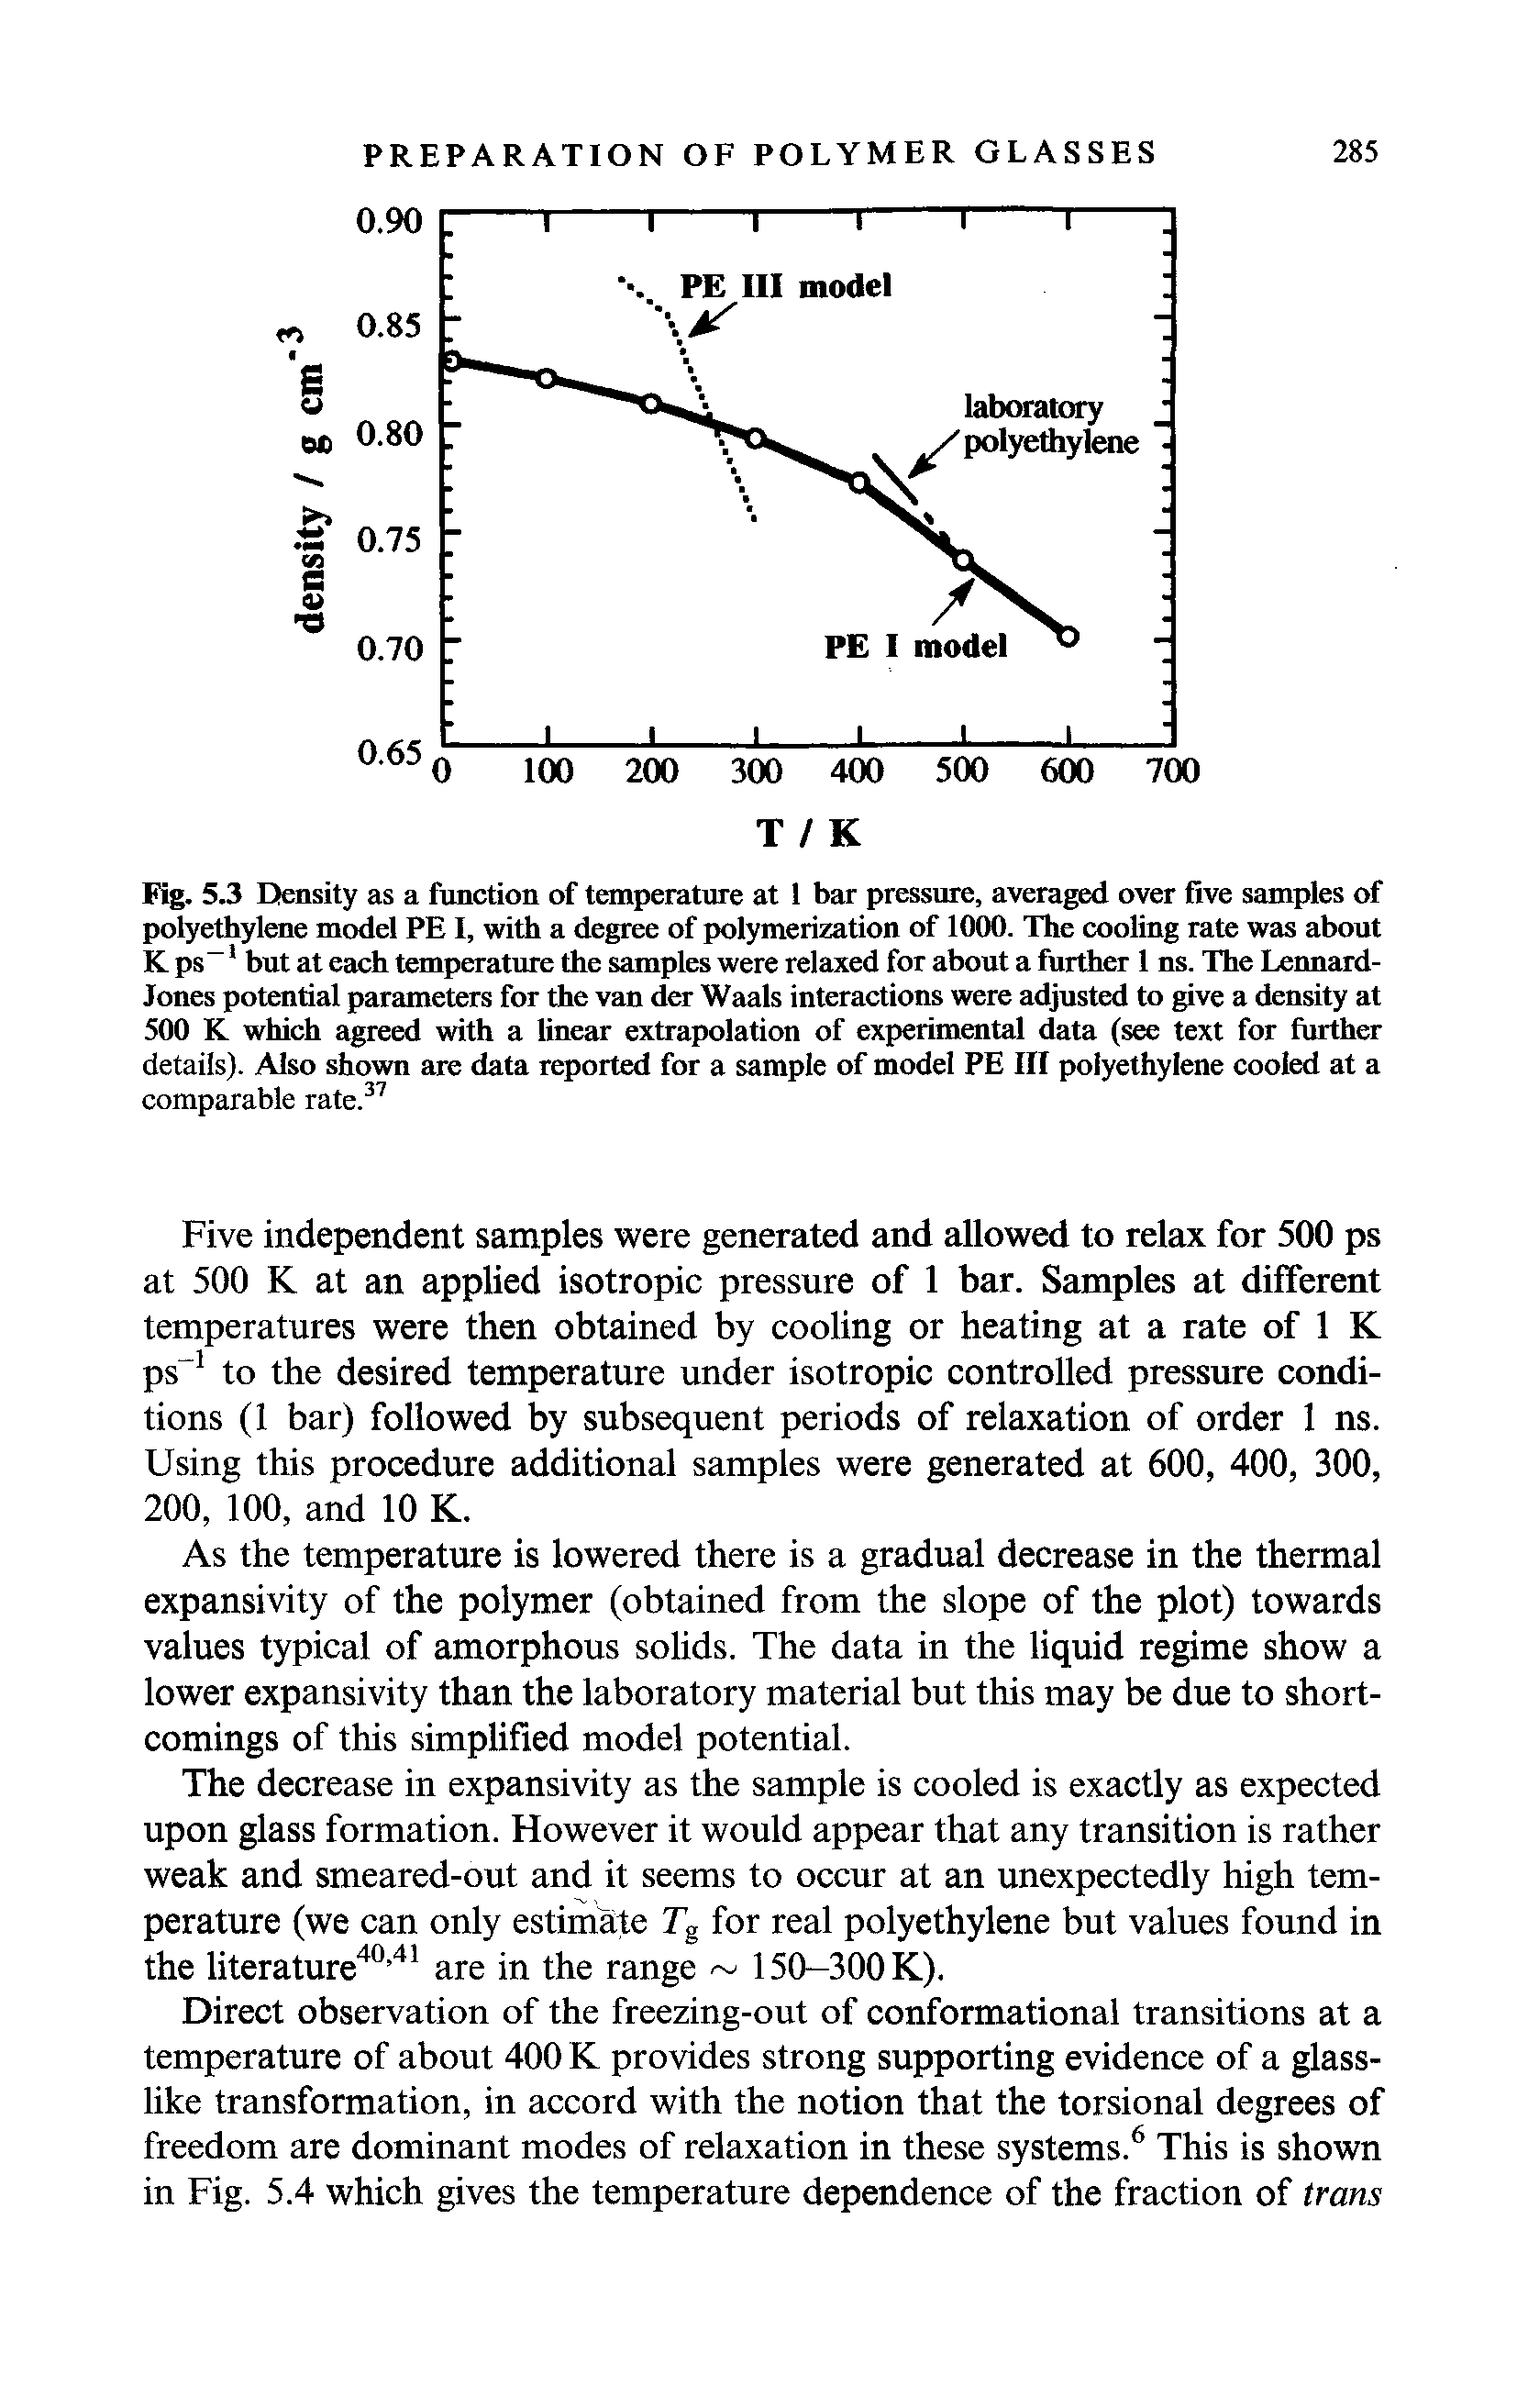 Fig. 5.3 Density as a function of temperature at 1 bar pressure, averaged over five sampies of polyethylene model PE I, with a degree of polymerization of 1000. The cooling rate was about K ps but at each temperature the samples were relaxed for about a further 1 ns. The Lennard-Jones potential parameters for the van der Waals interactions were adjusted to give a density at SOO K which agreed with a linear extrapolation of experimental data (see text for further details). Also shown are data reported for a sample of model PE III polyethylene cooled at a comparable rate. ...